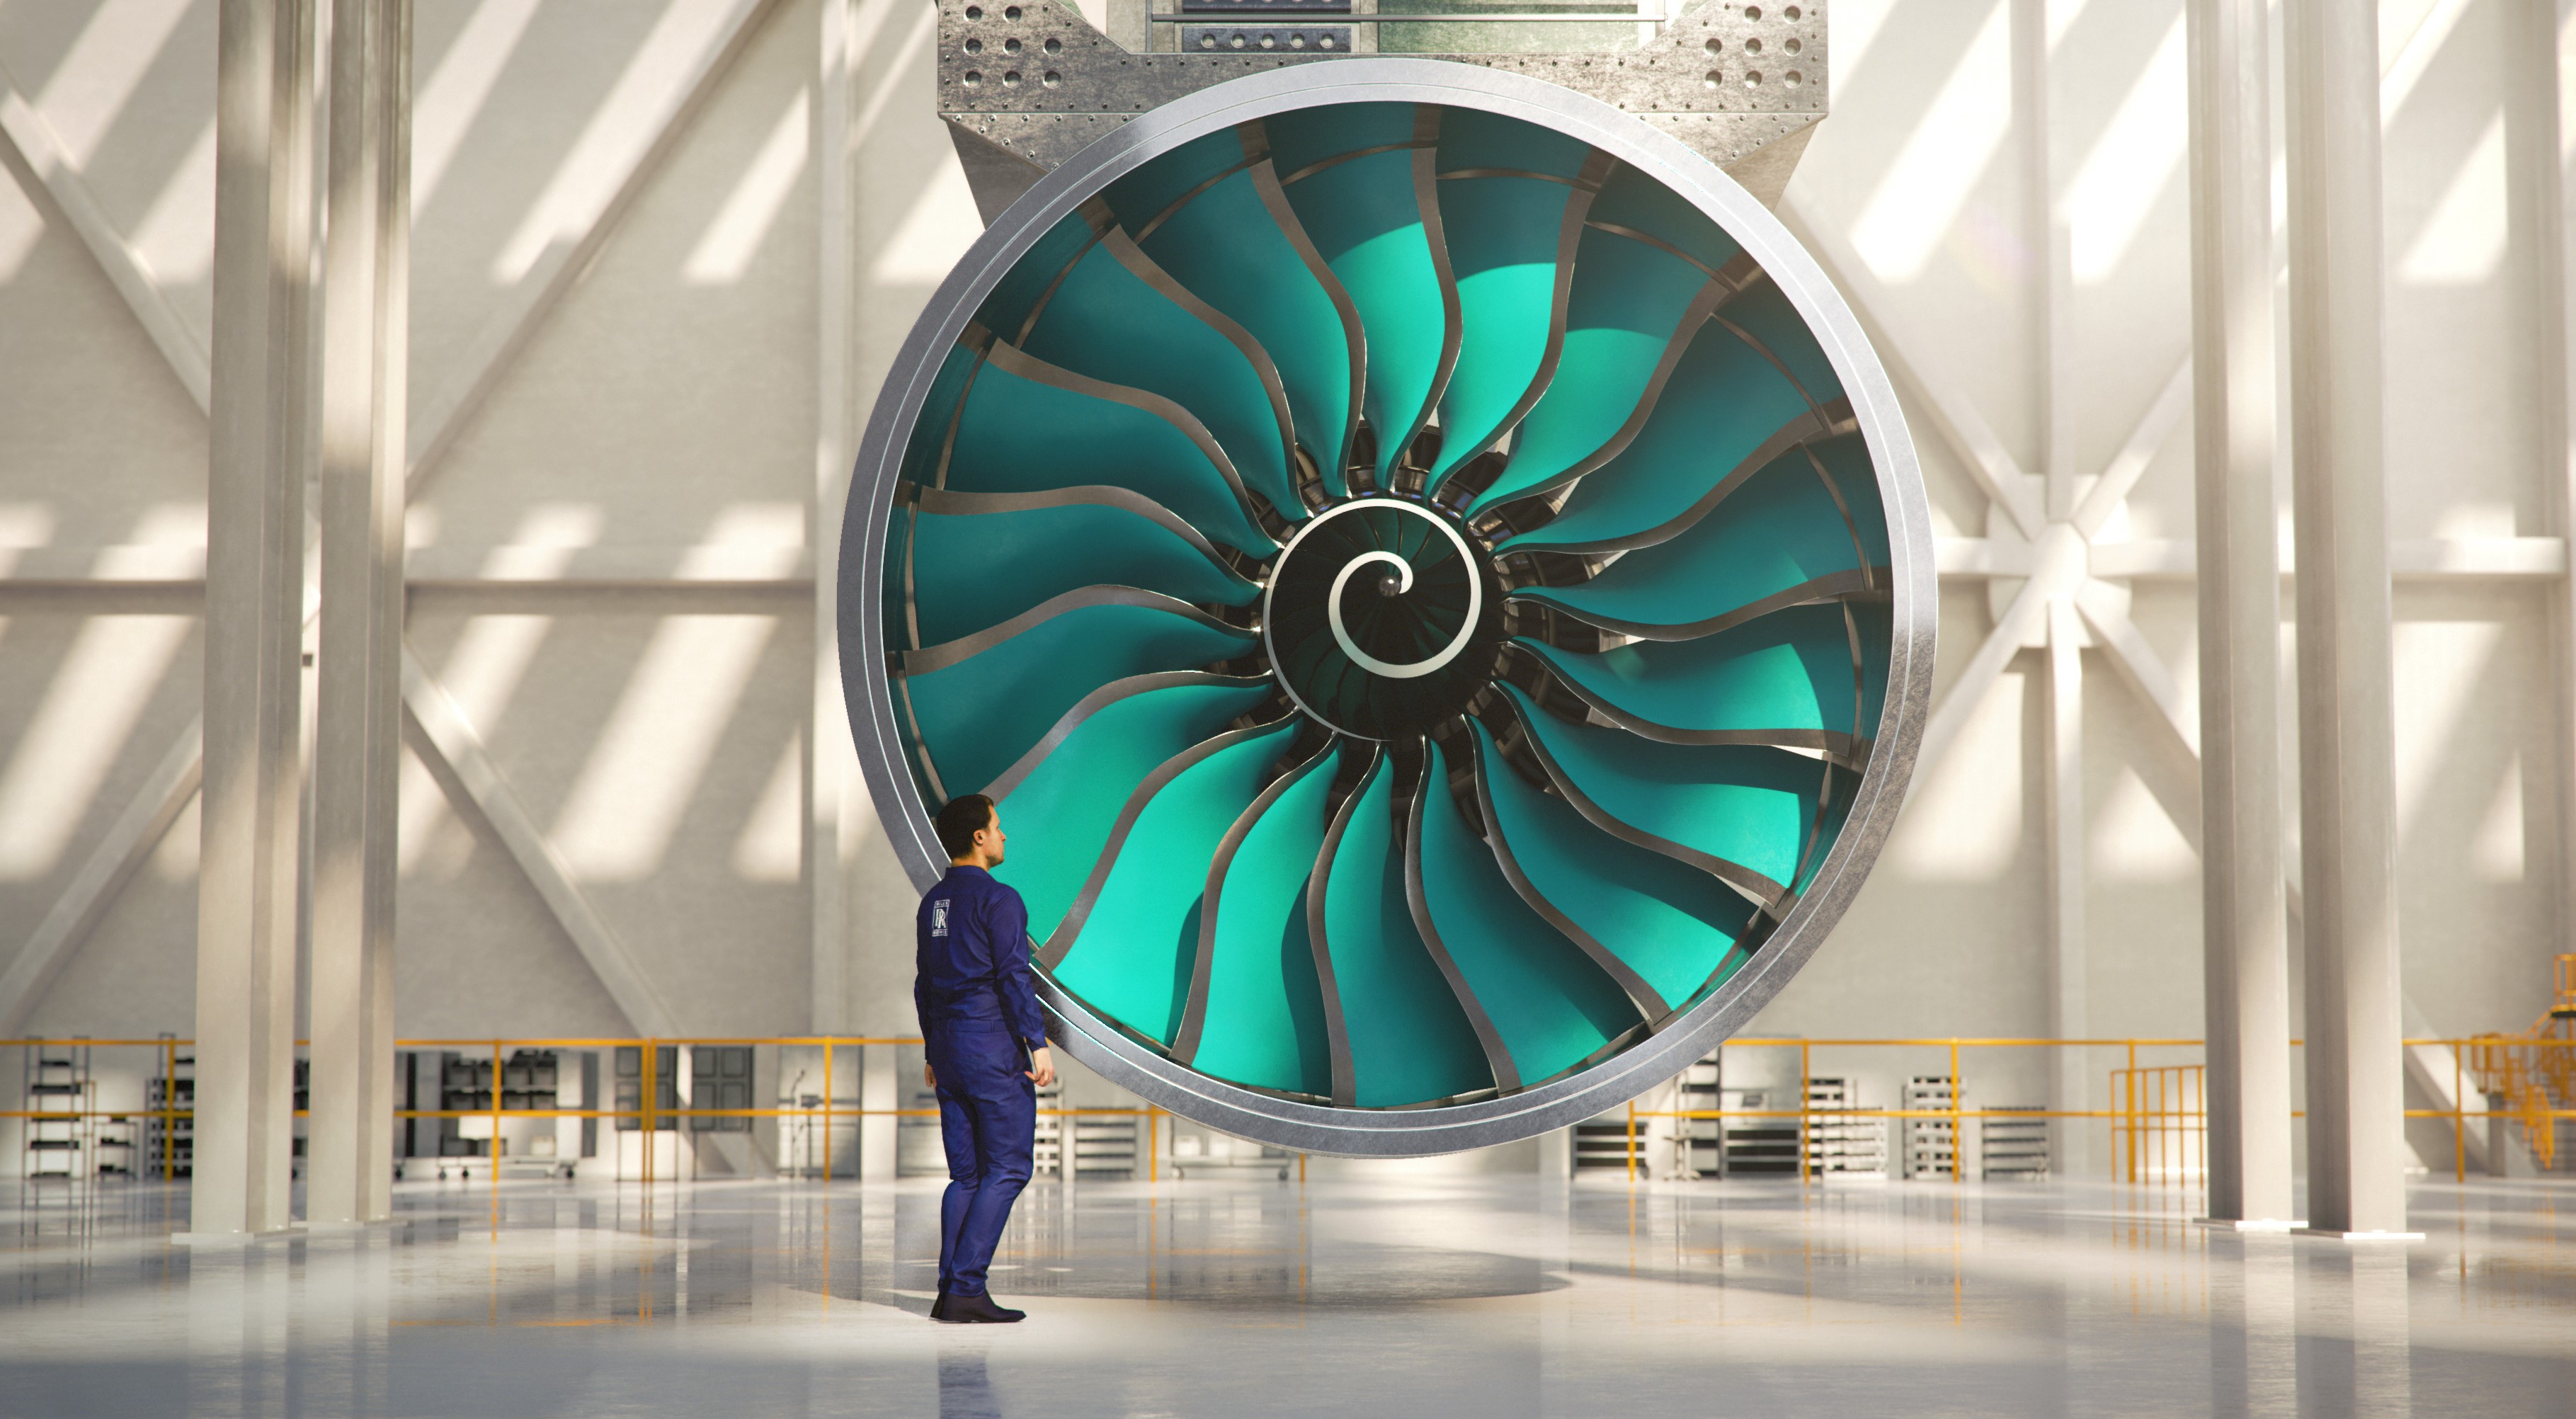 Press release - Rolls-Royce has officially started building the world’s largest aero-engine, UltraFan®